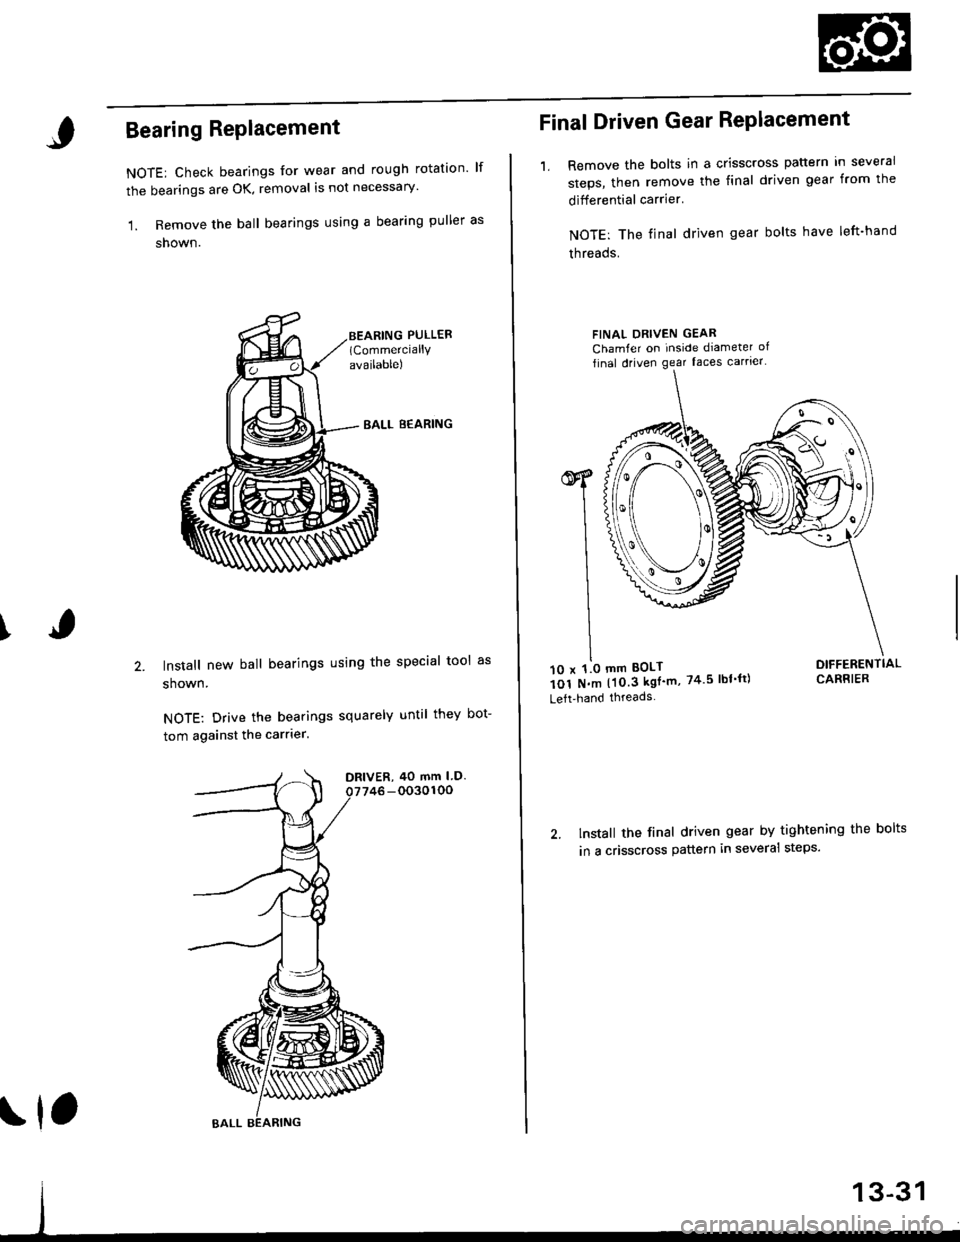 HONDA CIVIC 1997 6.G Workshop Manual I
Bearing RePlacement
NOTE: Check bearings for wear and rough rotation lf
the bearings are OK, removal is not necessary
1. Remove the ball bearings using a bearing puller as
shown.
EALL B€ARING
ln